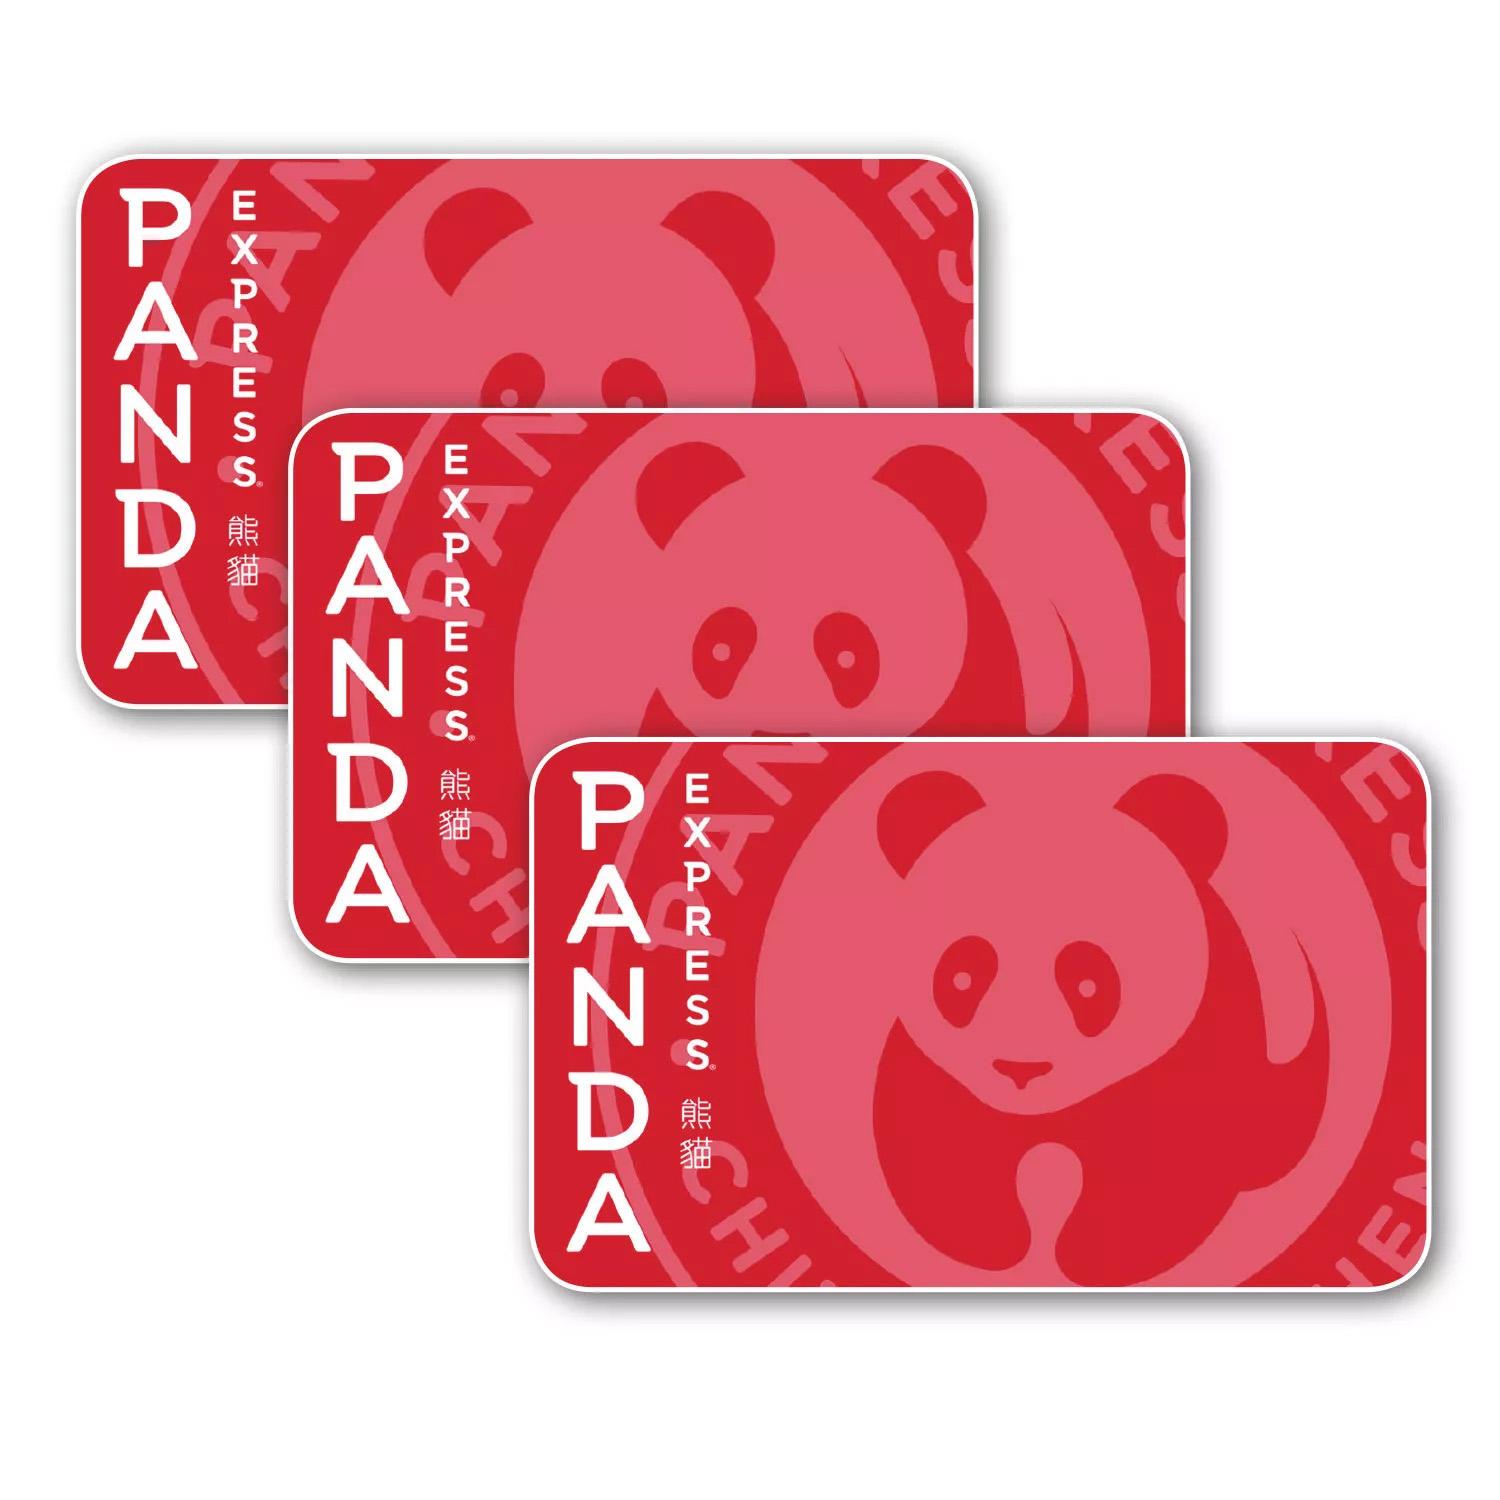 $45 Panda Express Gift Cards for $35.98 Shipped